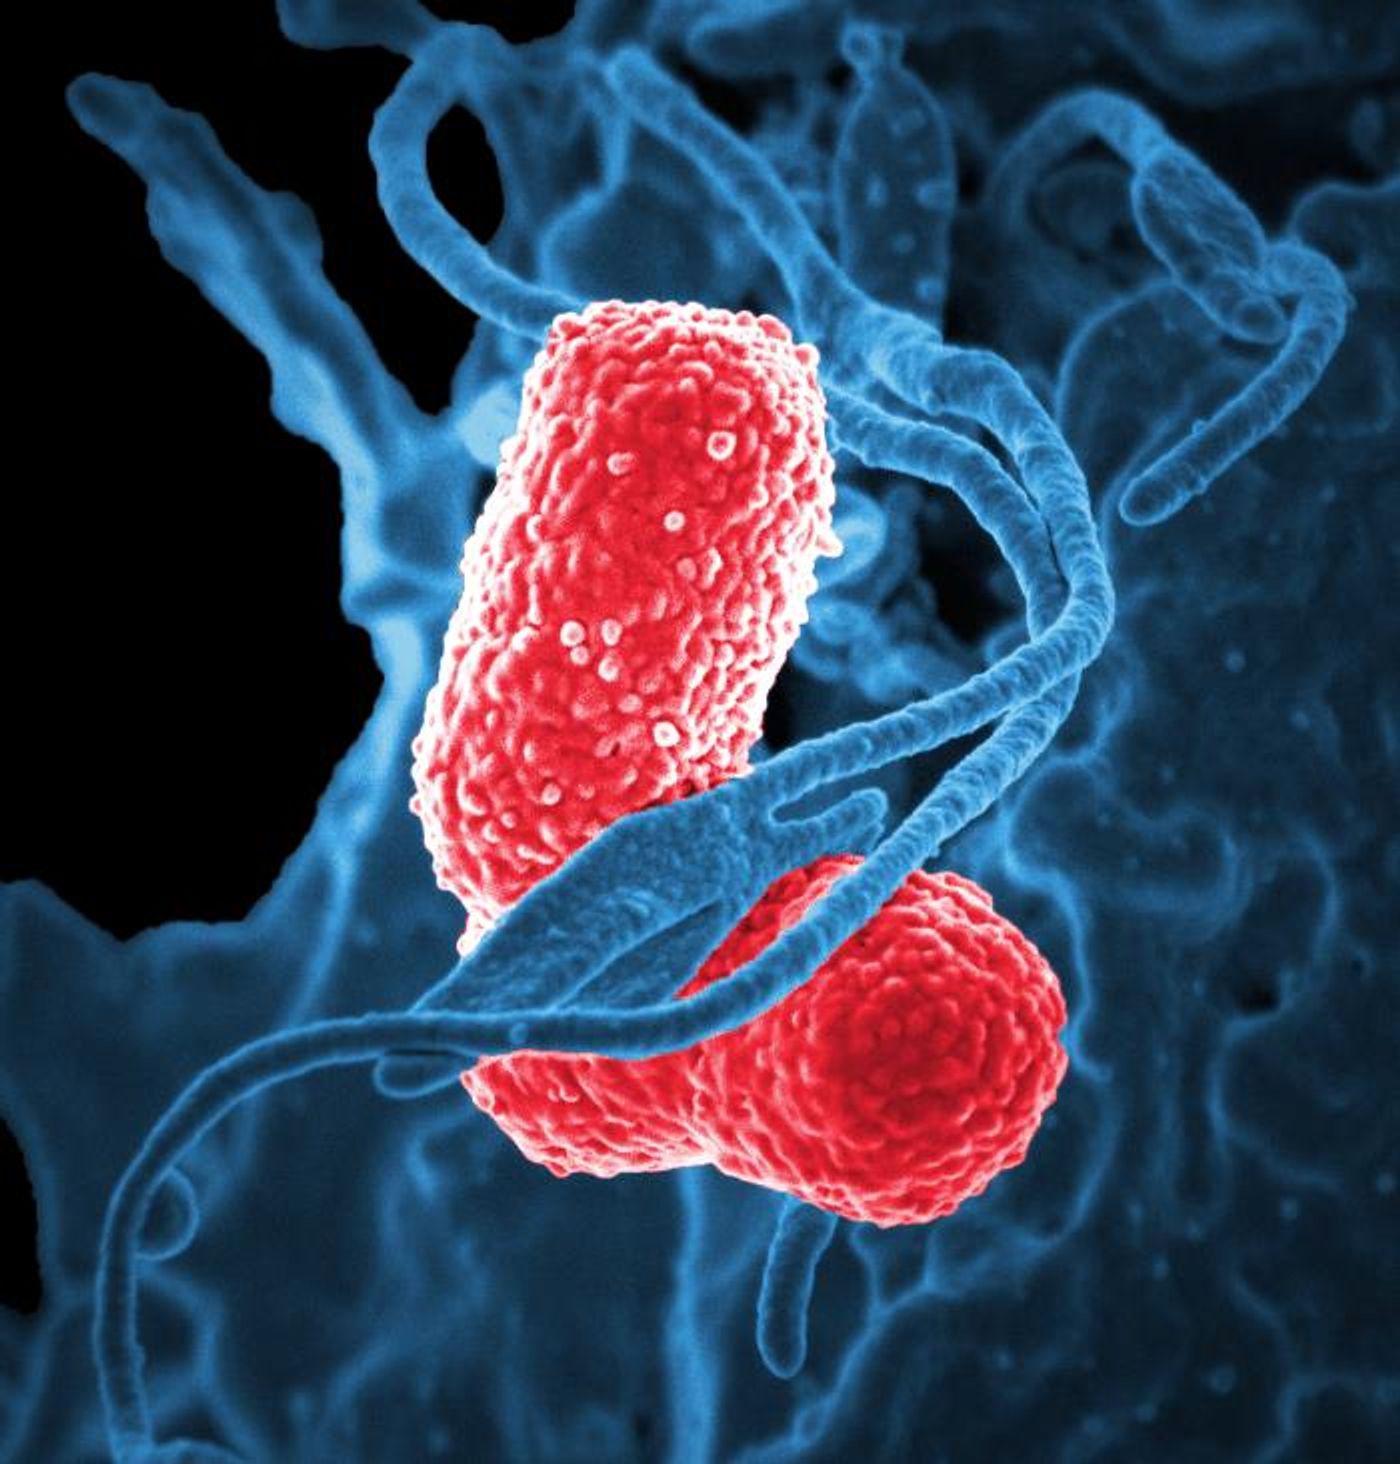 A digitally colorized SEM image of a blue-colored, human neutrophil, interacting with two pink-colored, rod shaped, multidrug-resistant (MDR), Klebsiella pneumoniae bacteria, which are known to cause severe hospital acquired, nosocomial infections. / Credit: National Institute of Allergy and Infectious Diseases (NIAID) / Image credit: David Dorward; PhD